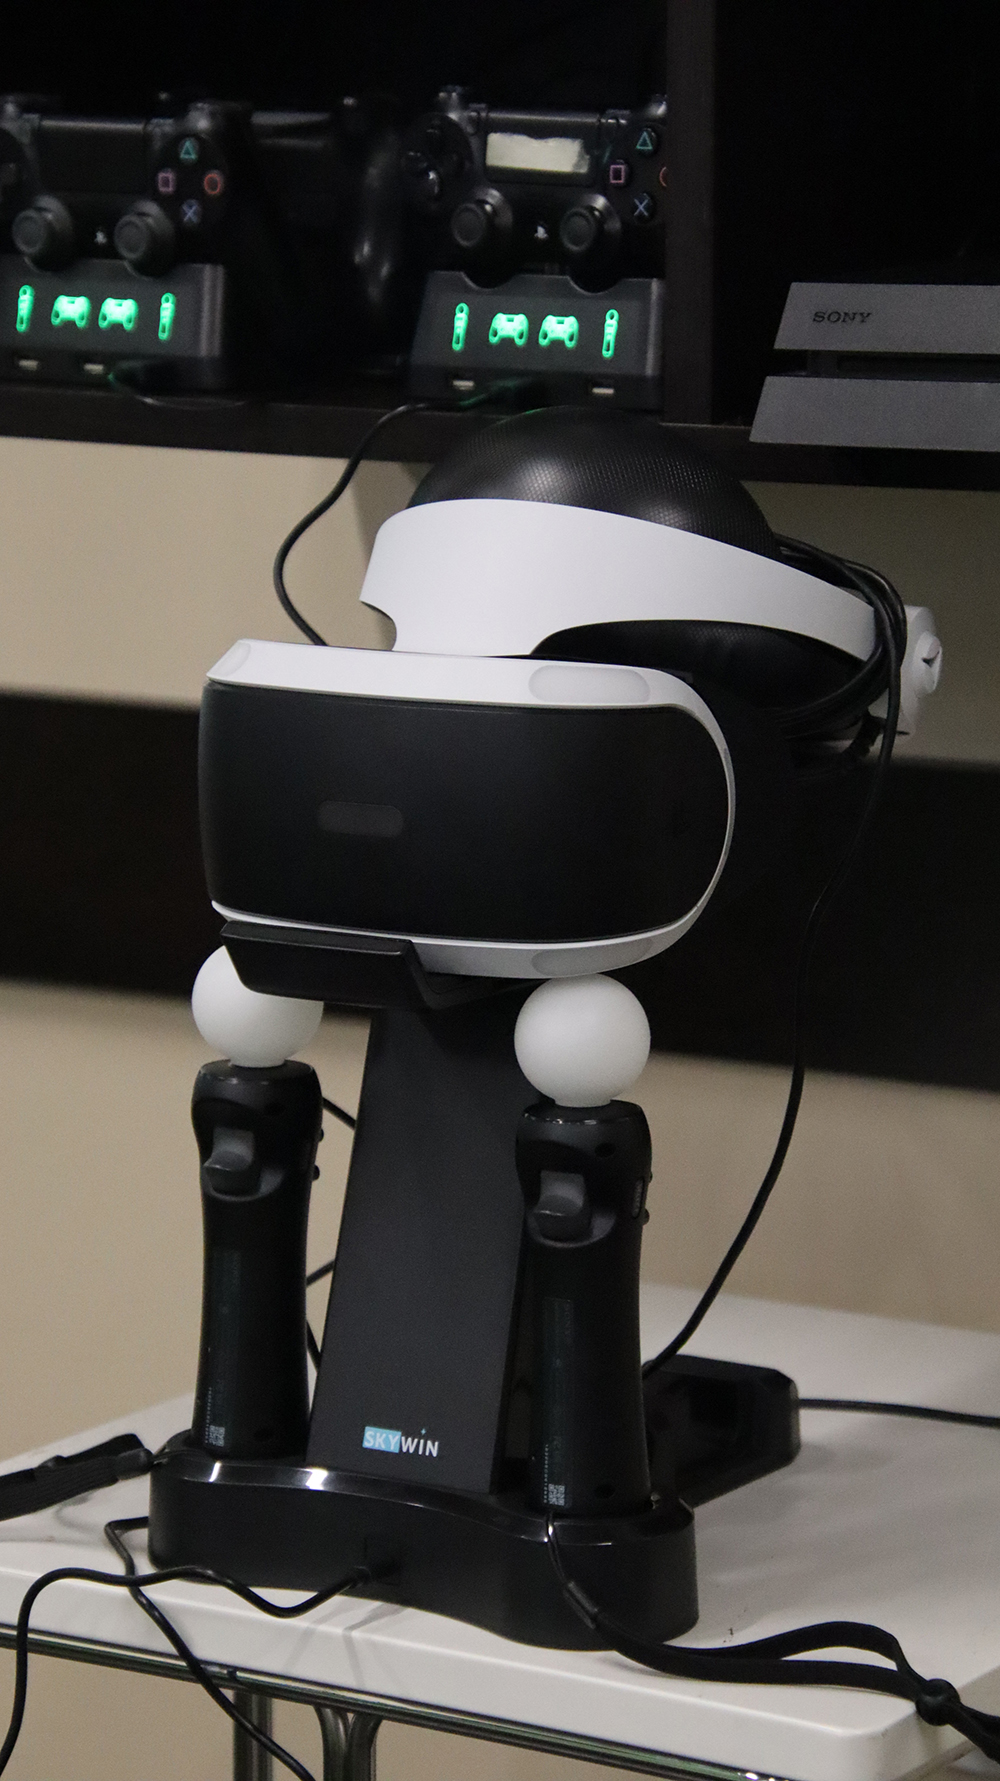 image of the game room's VR headset